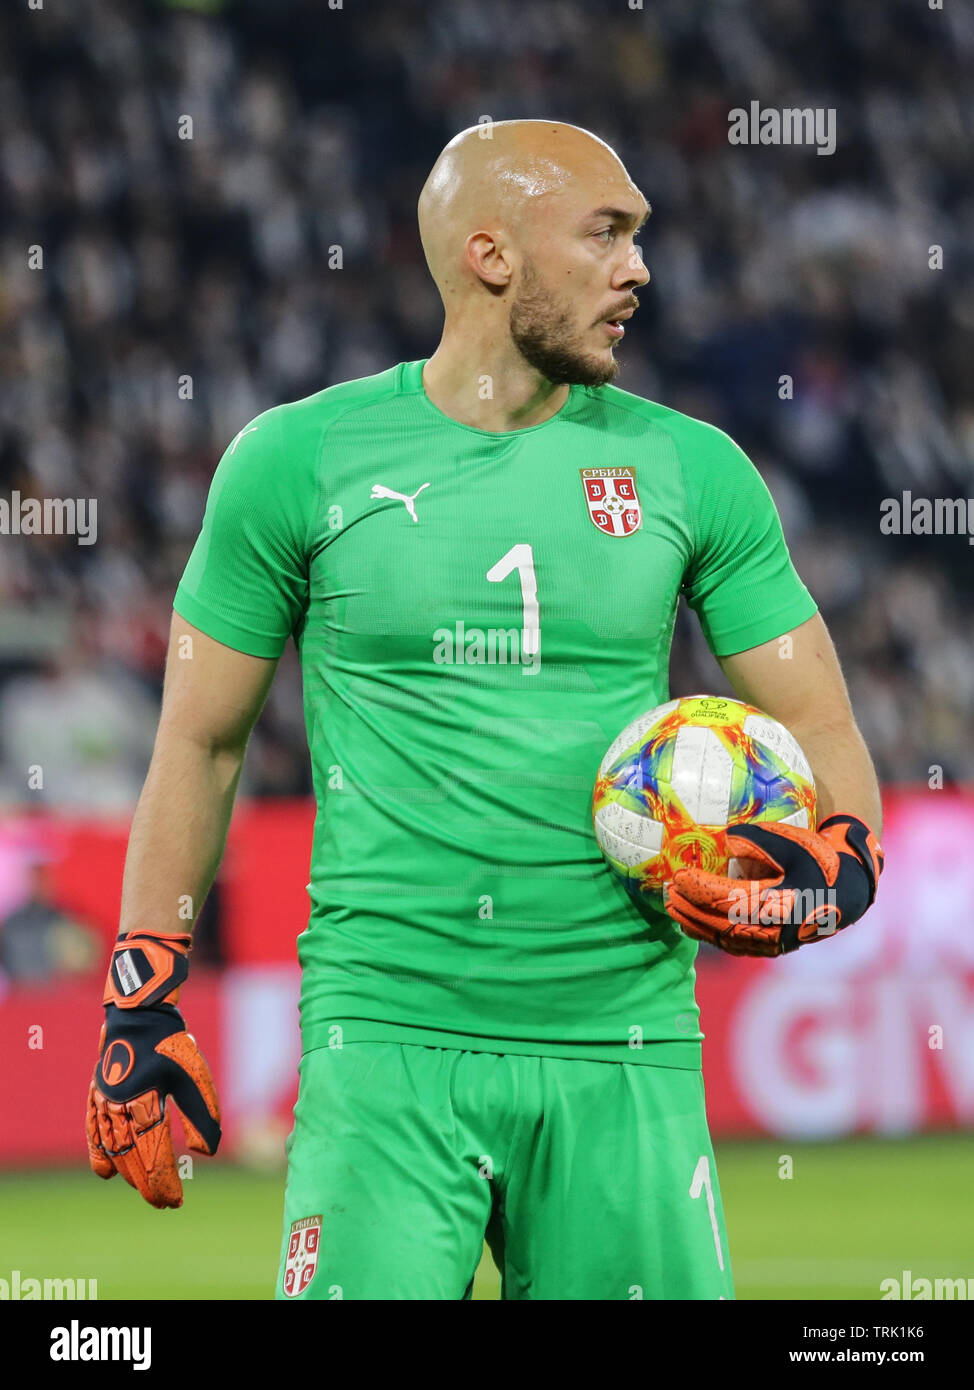 Wolfsburg, Germany, March 20, 2019: Serbia national team goalkeeper, Marko Dmitrovic, during the soccer game between Germany and Serbia. Stock Photo